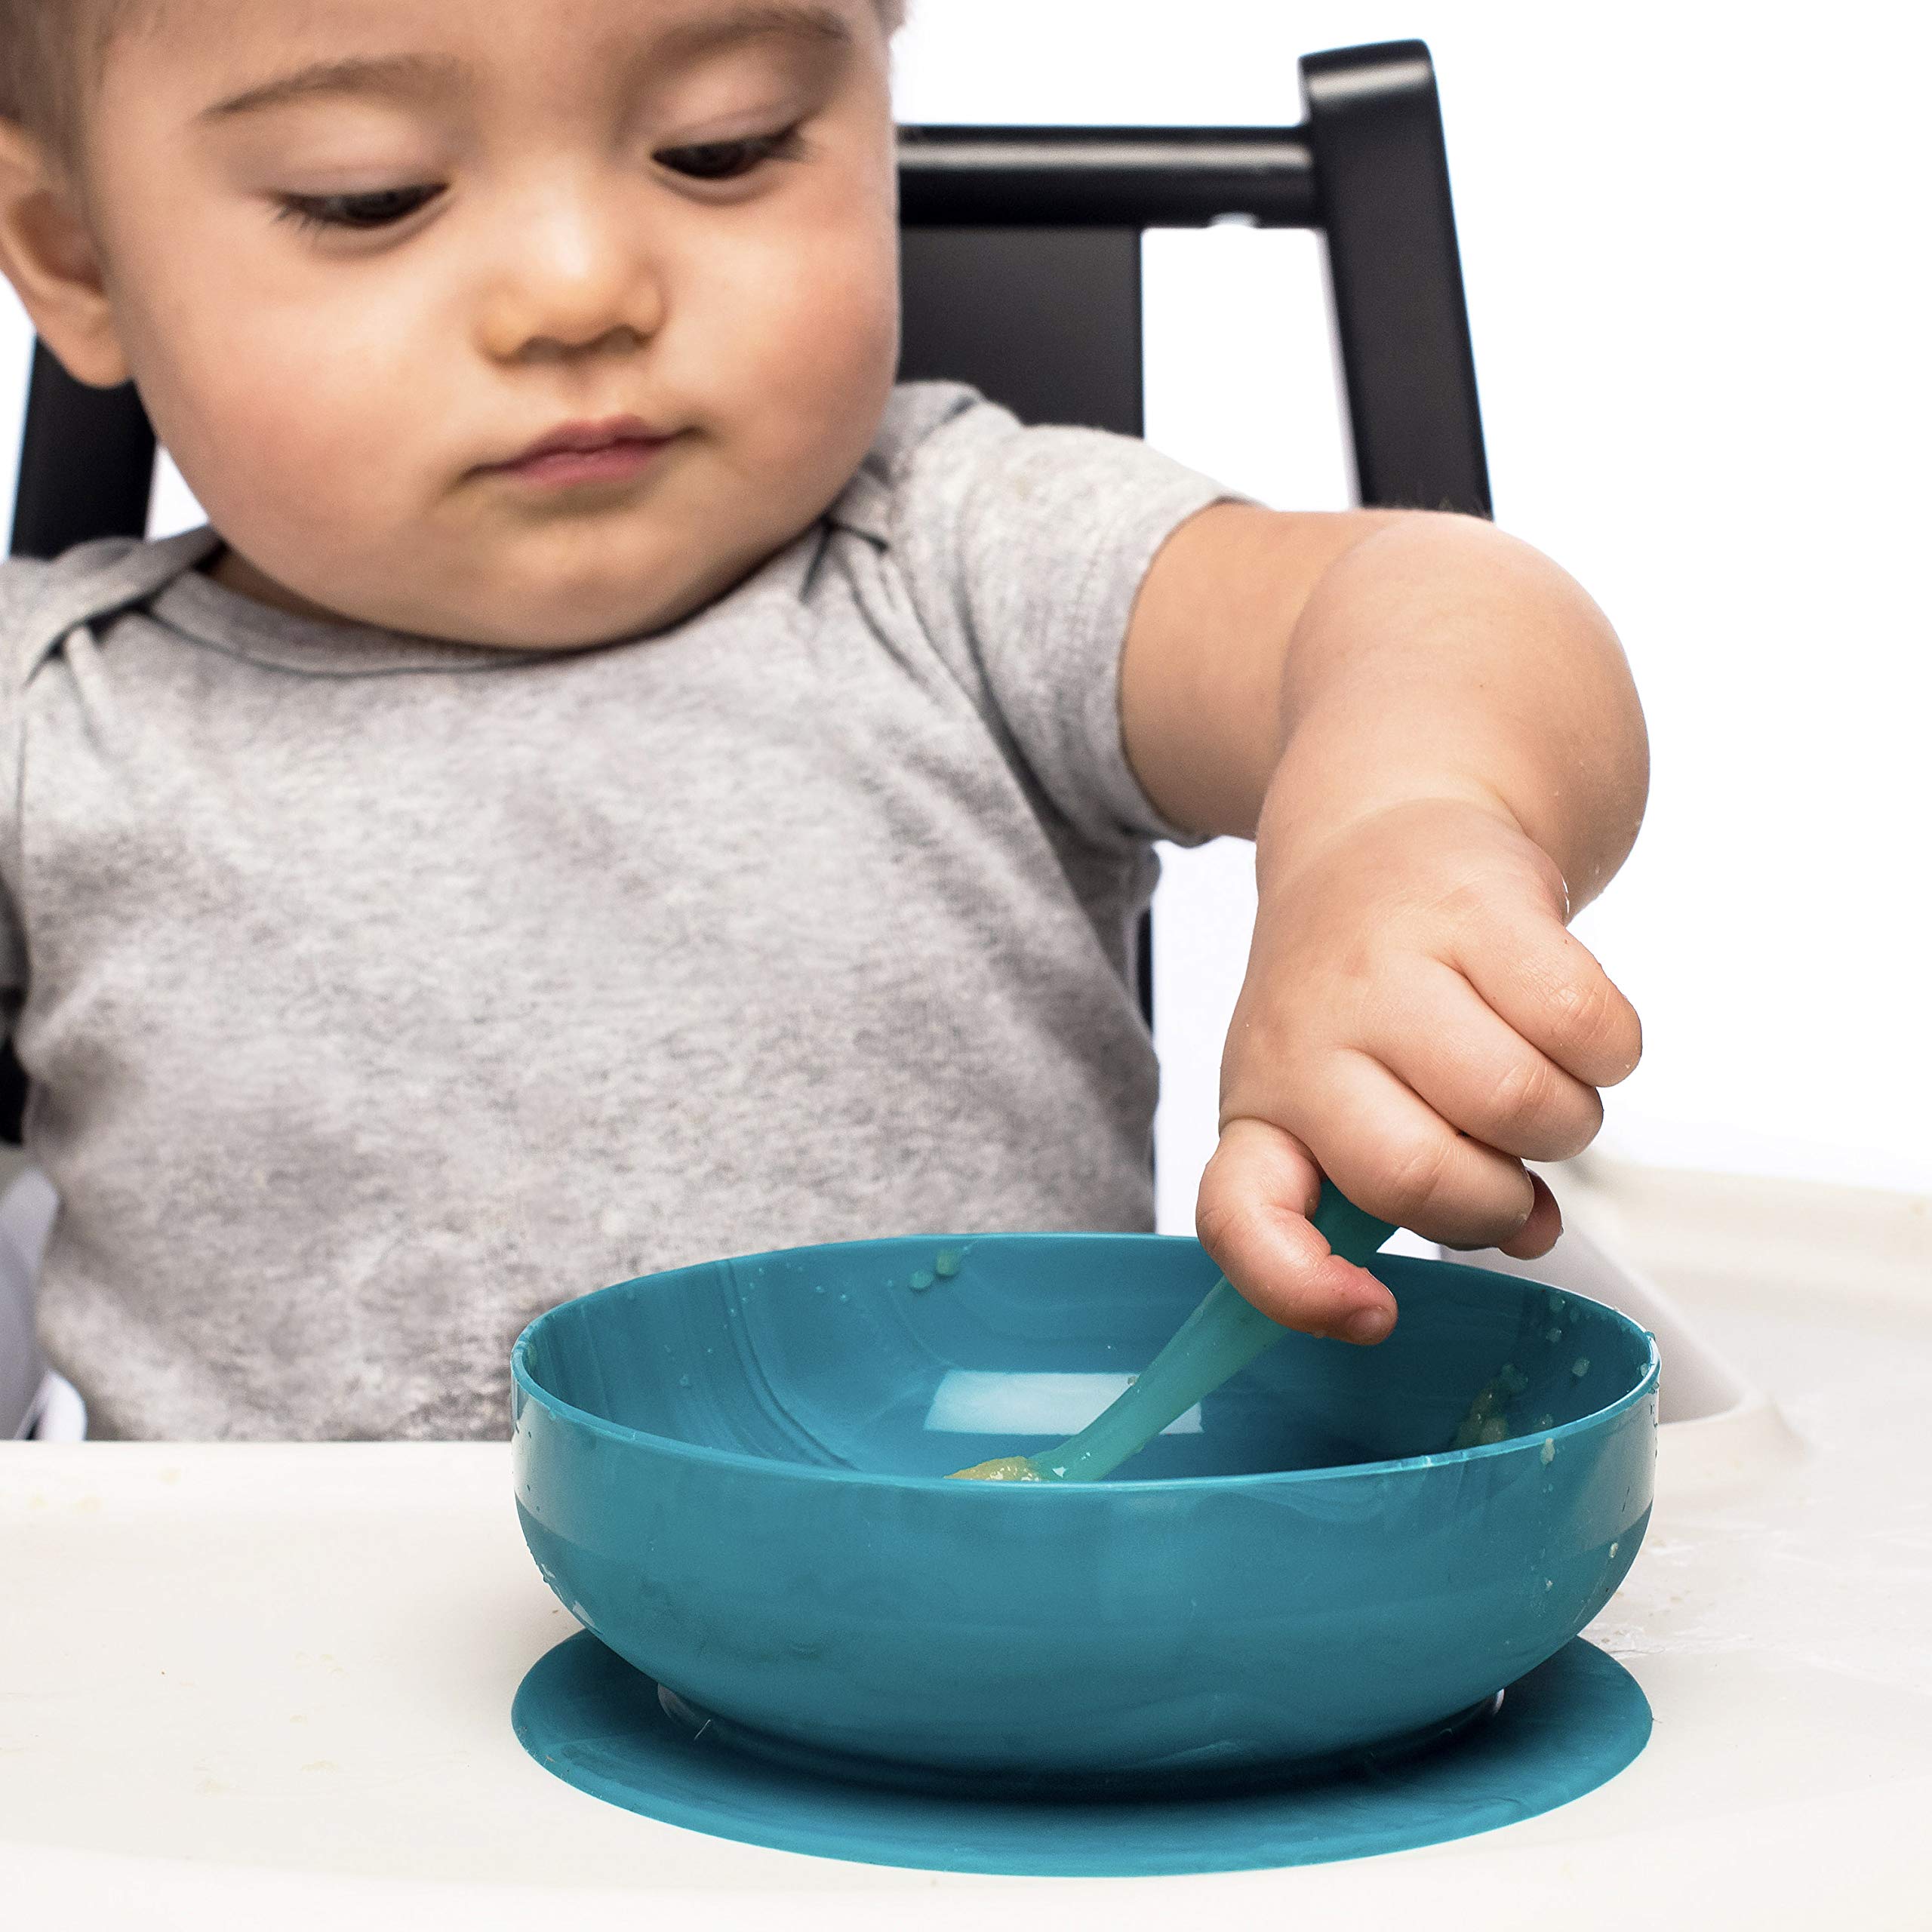 ChooMee Silicone Suction Bowls | Extra Strong Suction with Firm Bowl | Ideal for Infant and Toddler Baby Led Feeding | Large 1 CT